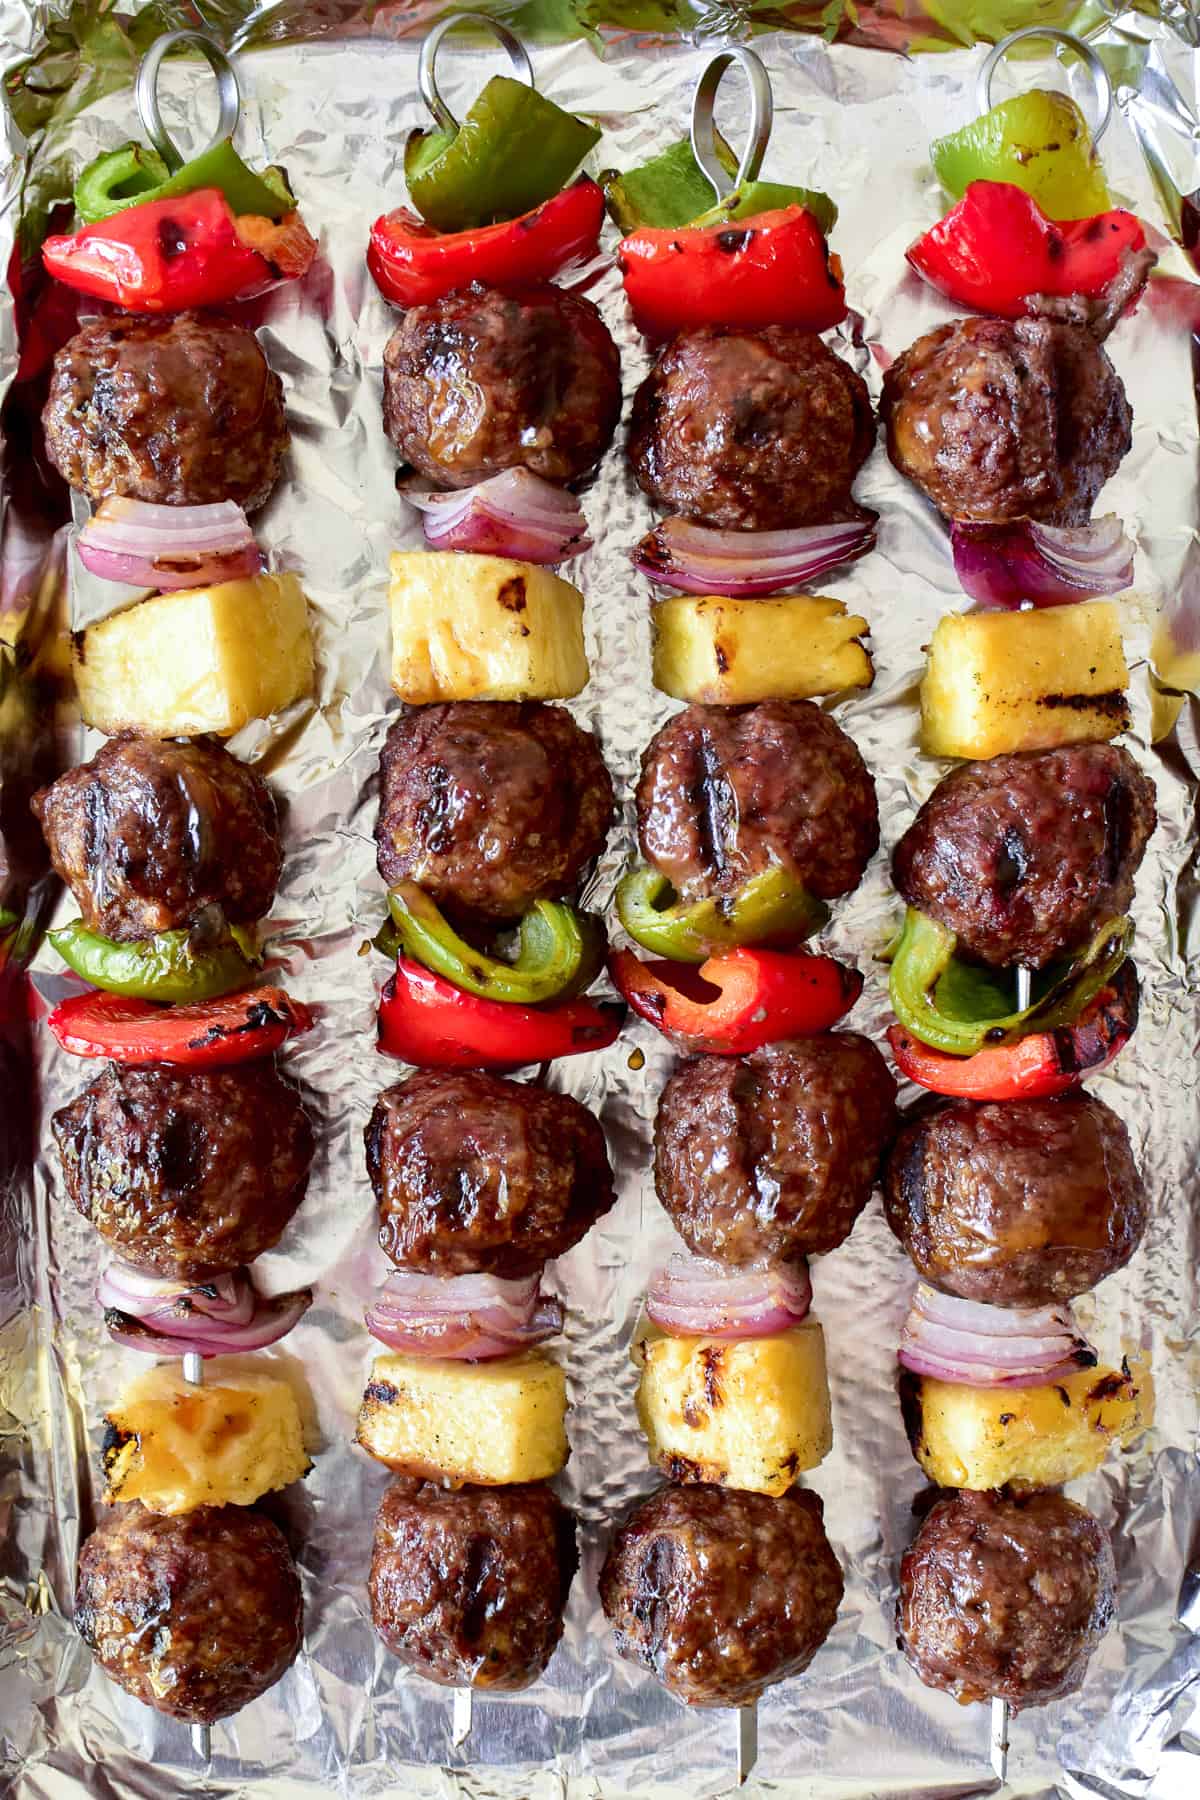 Tropical Appetizers - Finger Foods - Easy Grilled Pineapple Meatball Skewers 